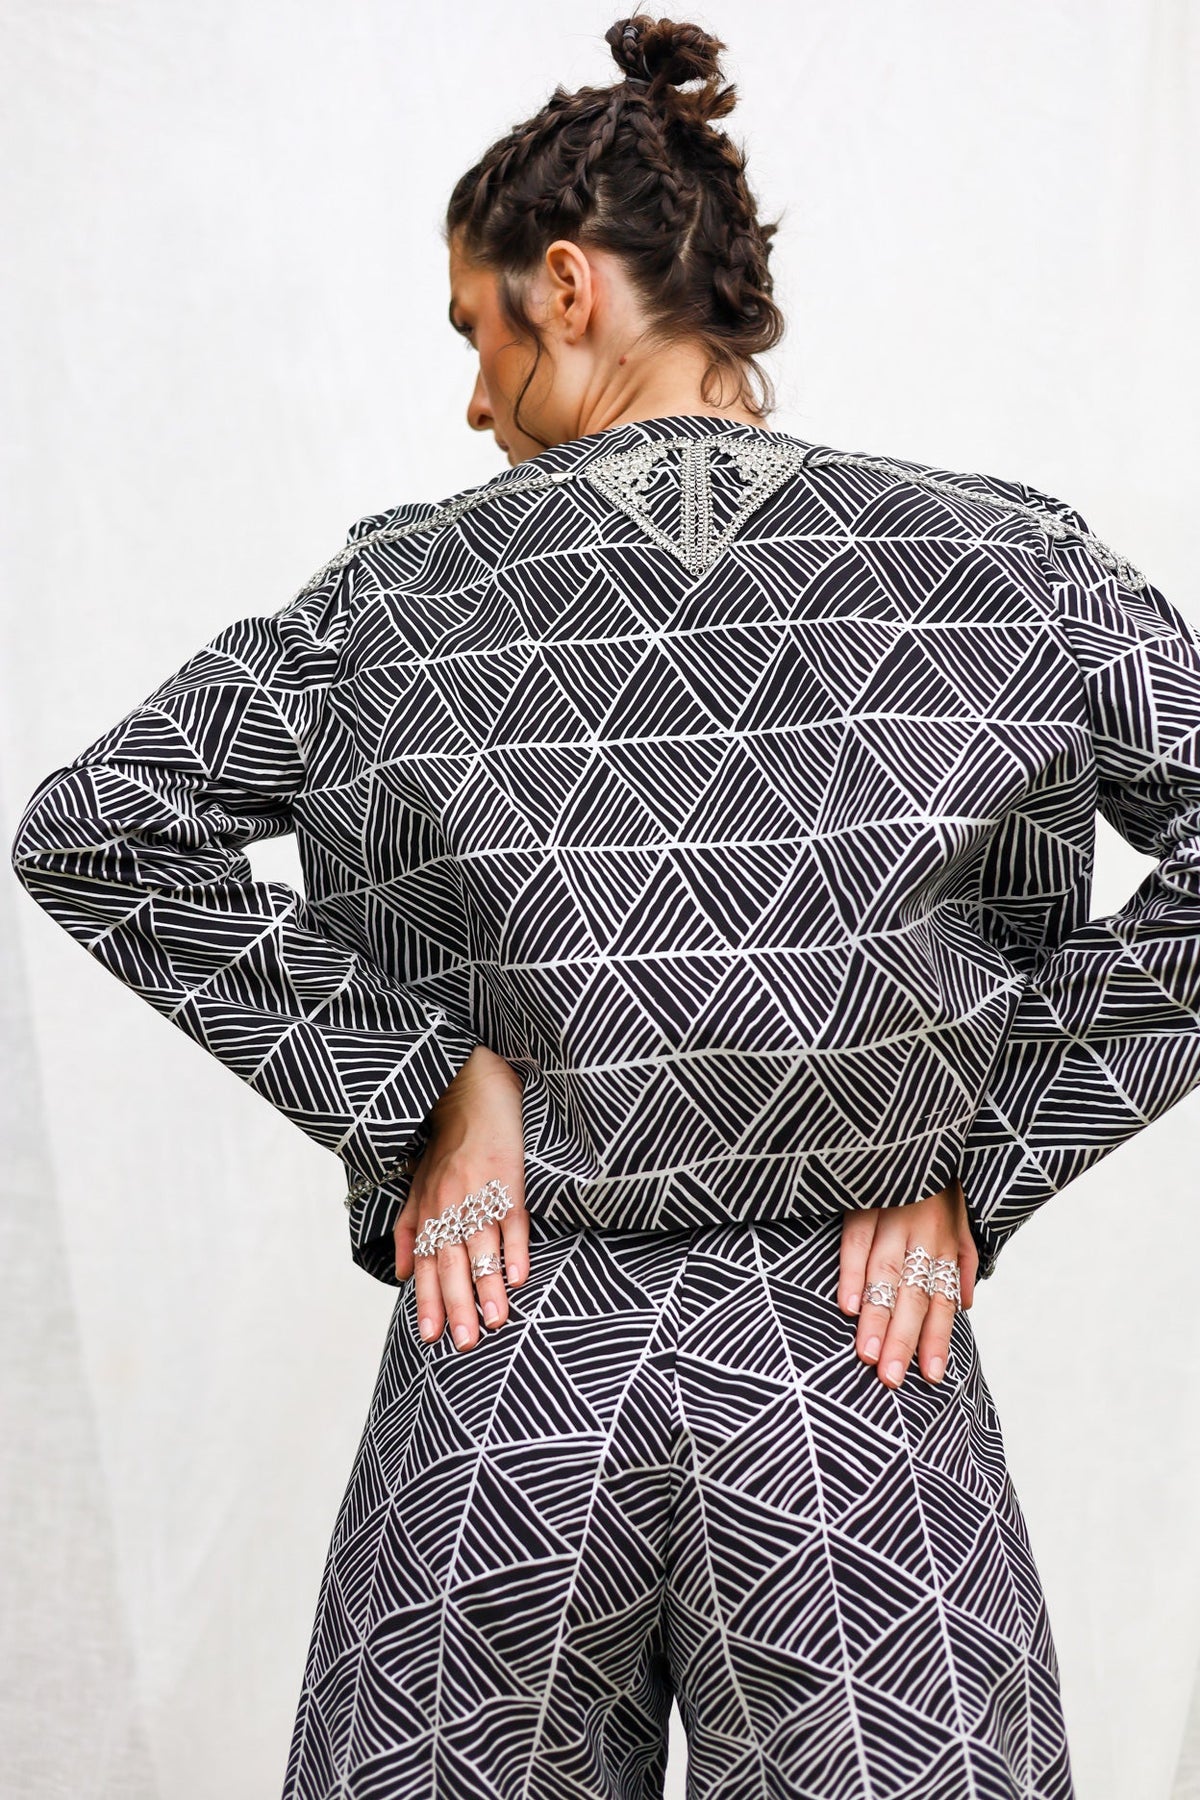 GLORY by Tiwi Design x Ossom Embellished Pandanus Jacket in Lightweight Cotton